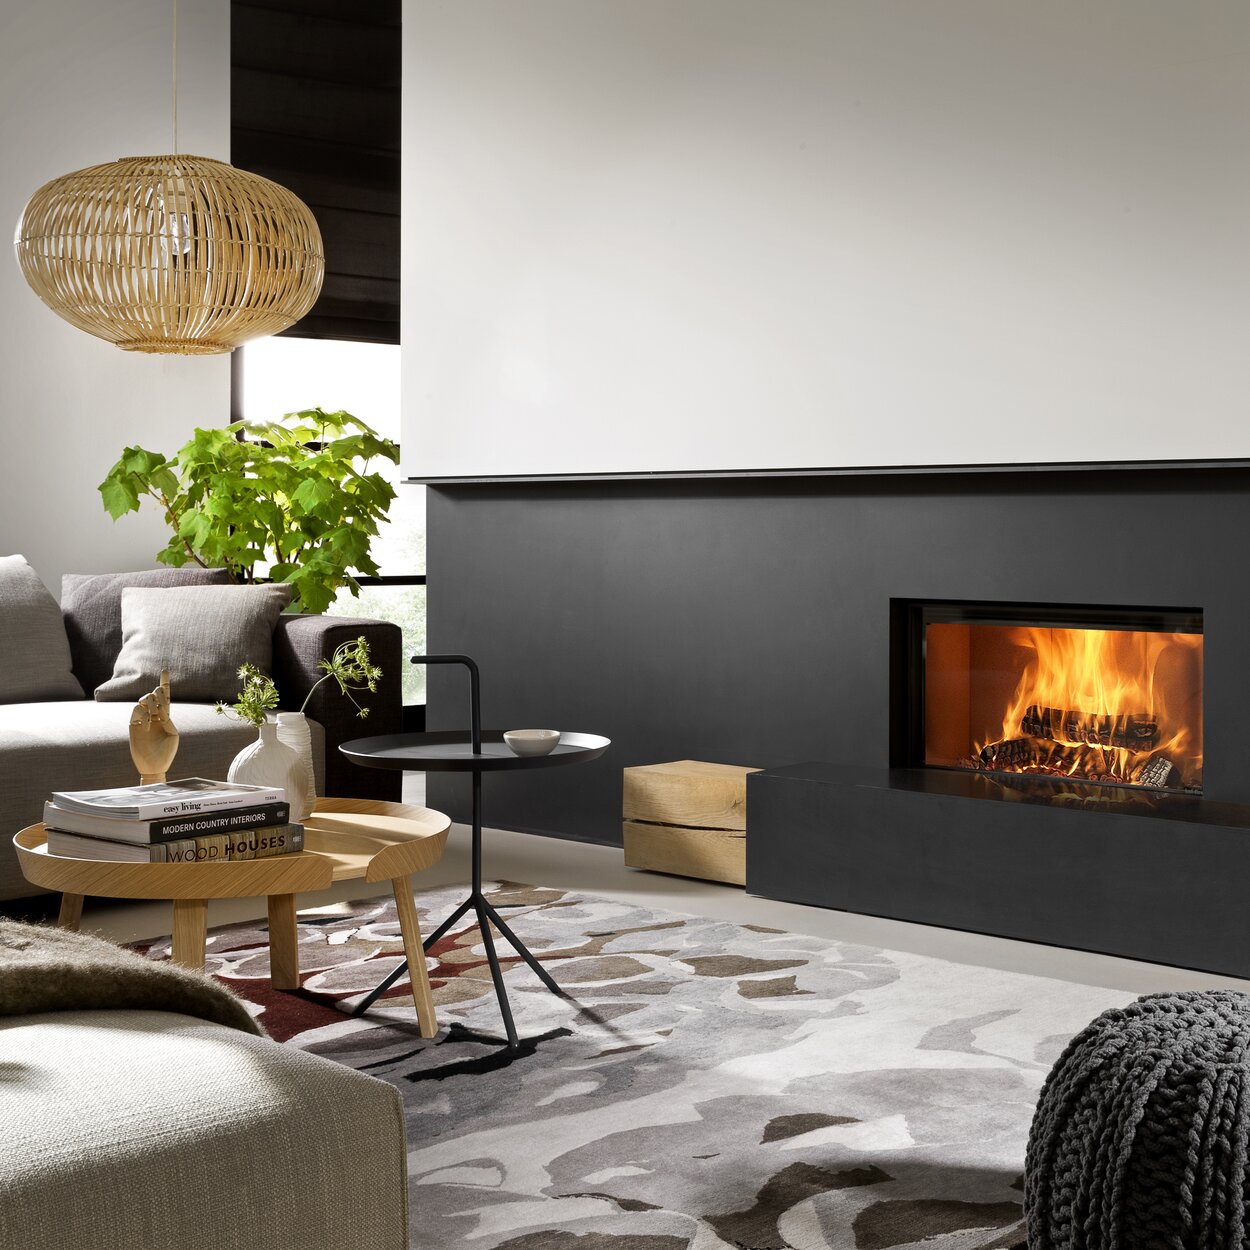 Wood fireplace W85/40F by Kalfire in a black steel front in a small living room